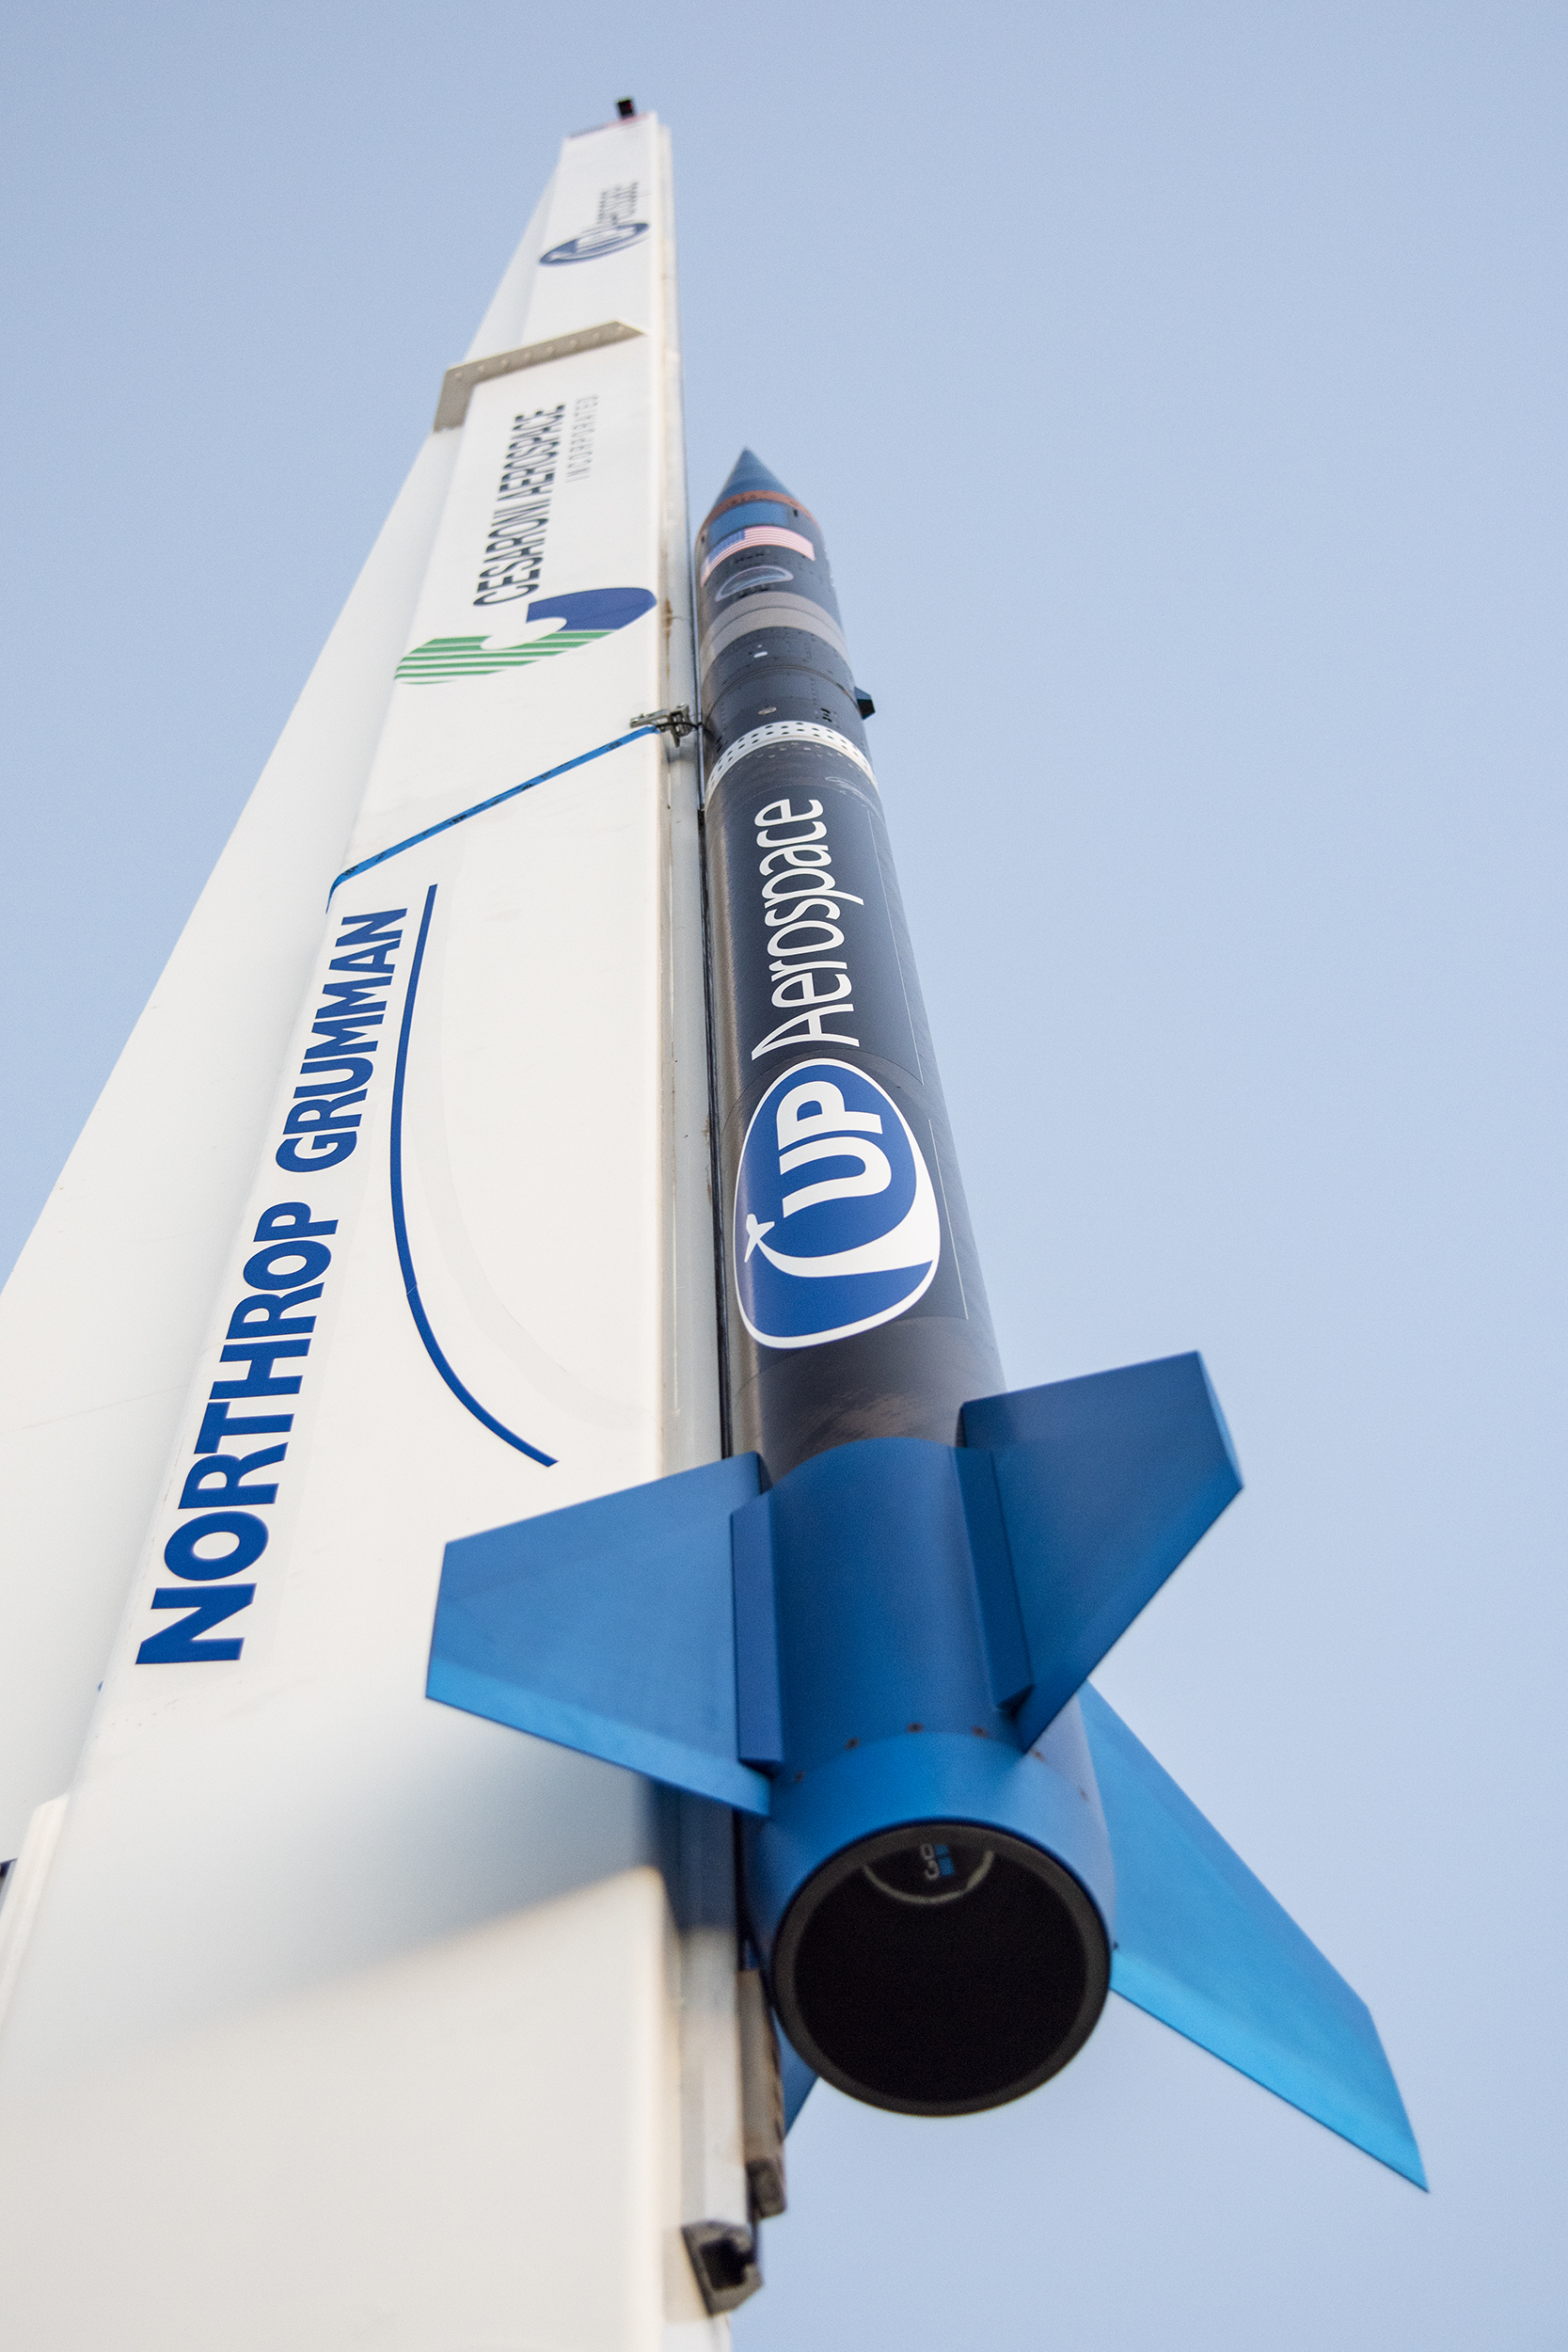 UP Aerospace SpaceLoft rocket launched into space Sept 12, 2018 from Spaceport America in New Mexico carrying NASA technologies.